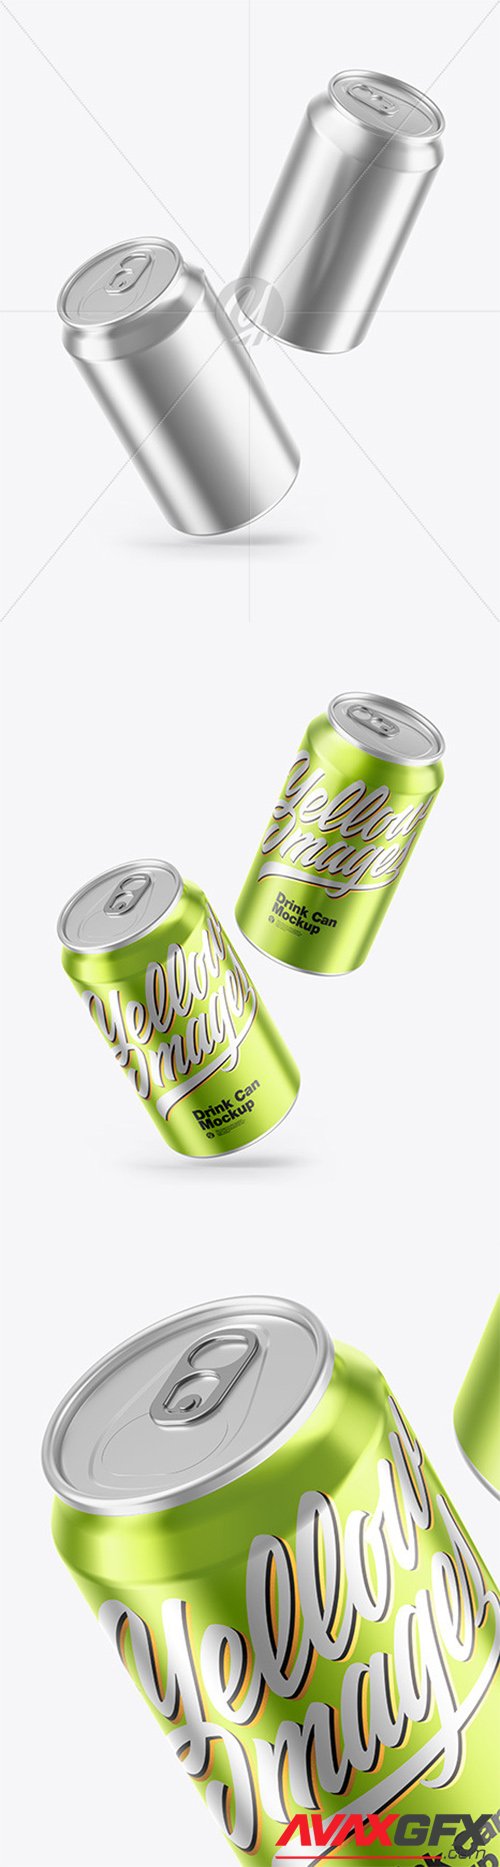 Download Two Metallic Drink Cans W Glossy Finish Mockup 68403 Avaxgfx All Downloads That You Need In One Place Graphic From Nitroflare Rapidgator Yellowimages Mockups